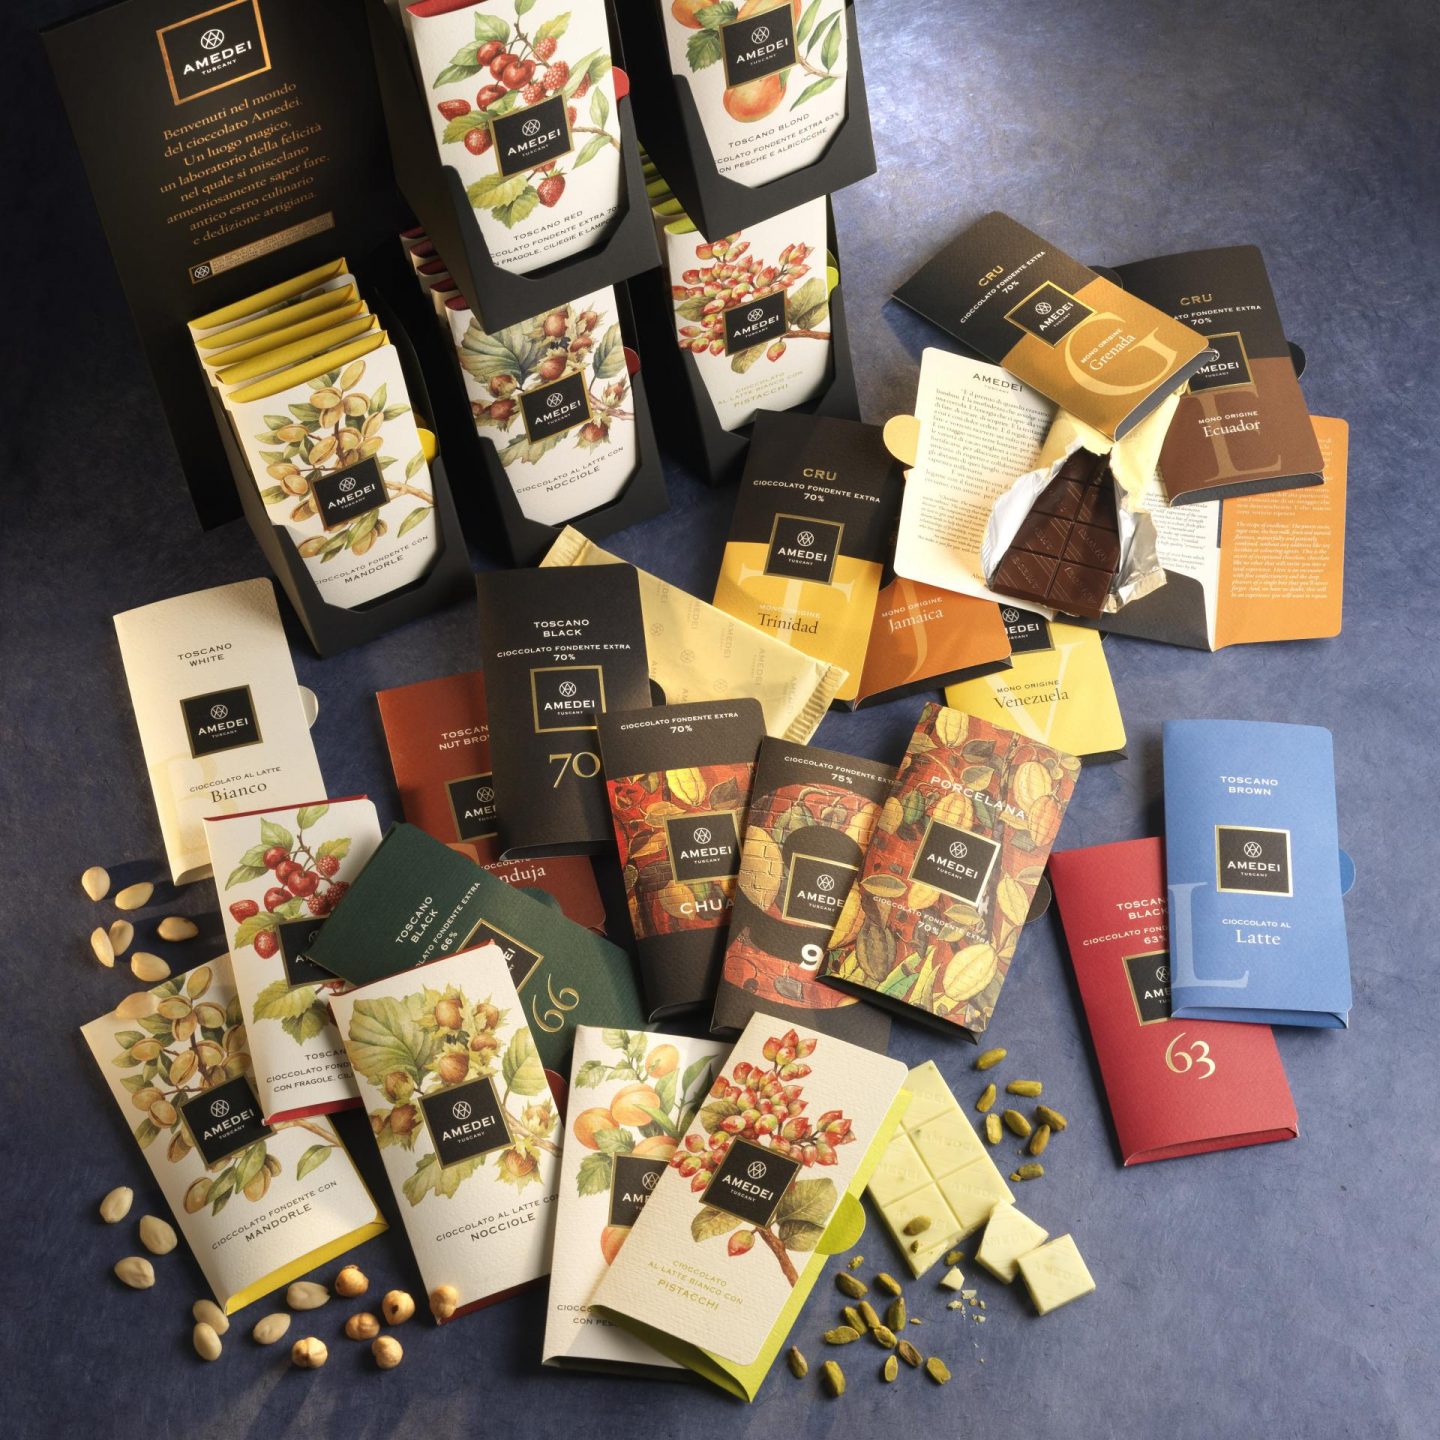 Discovering: Amedei Tuscany Chocolate